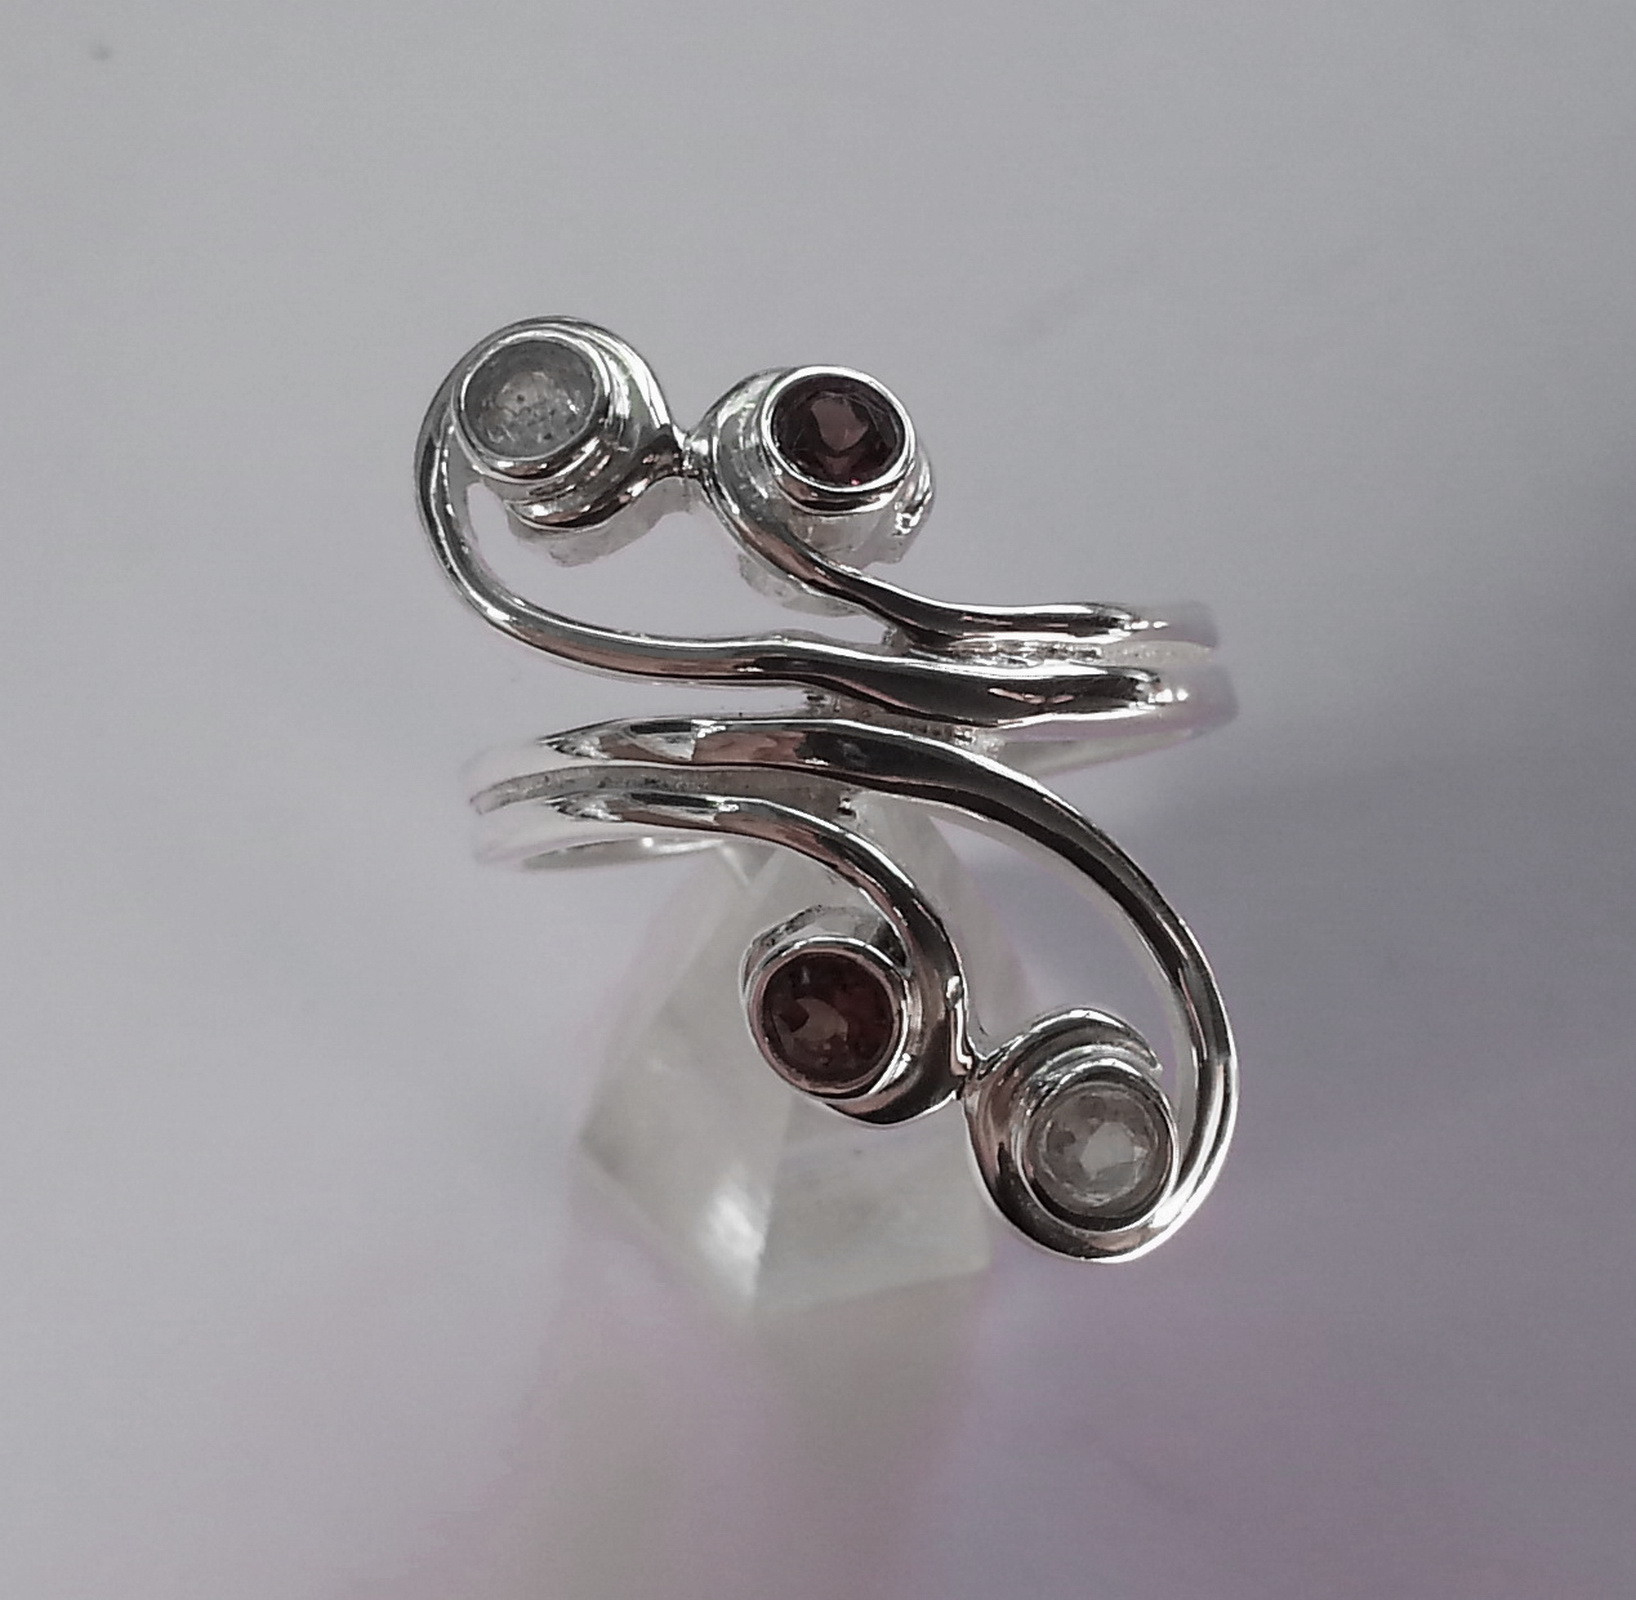 Spirals of sterling silver set with 4 faceted gemstones